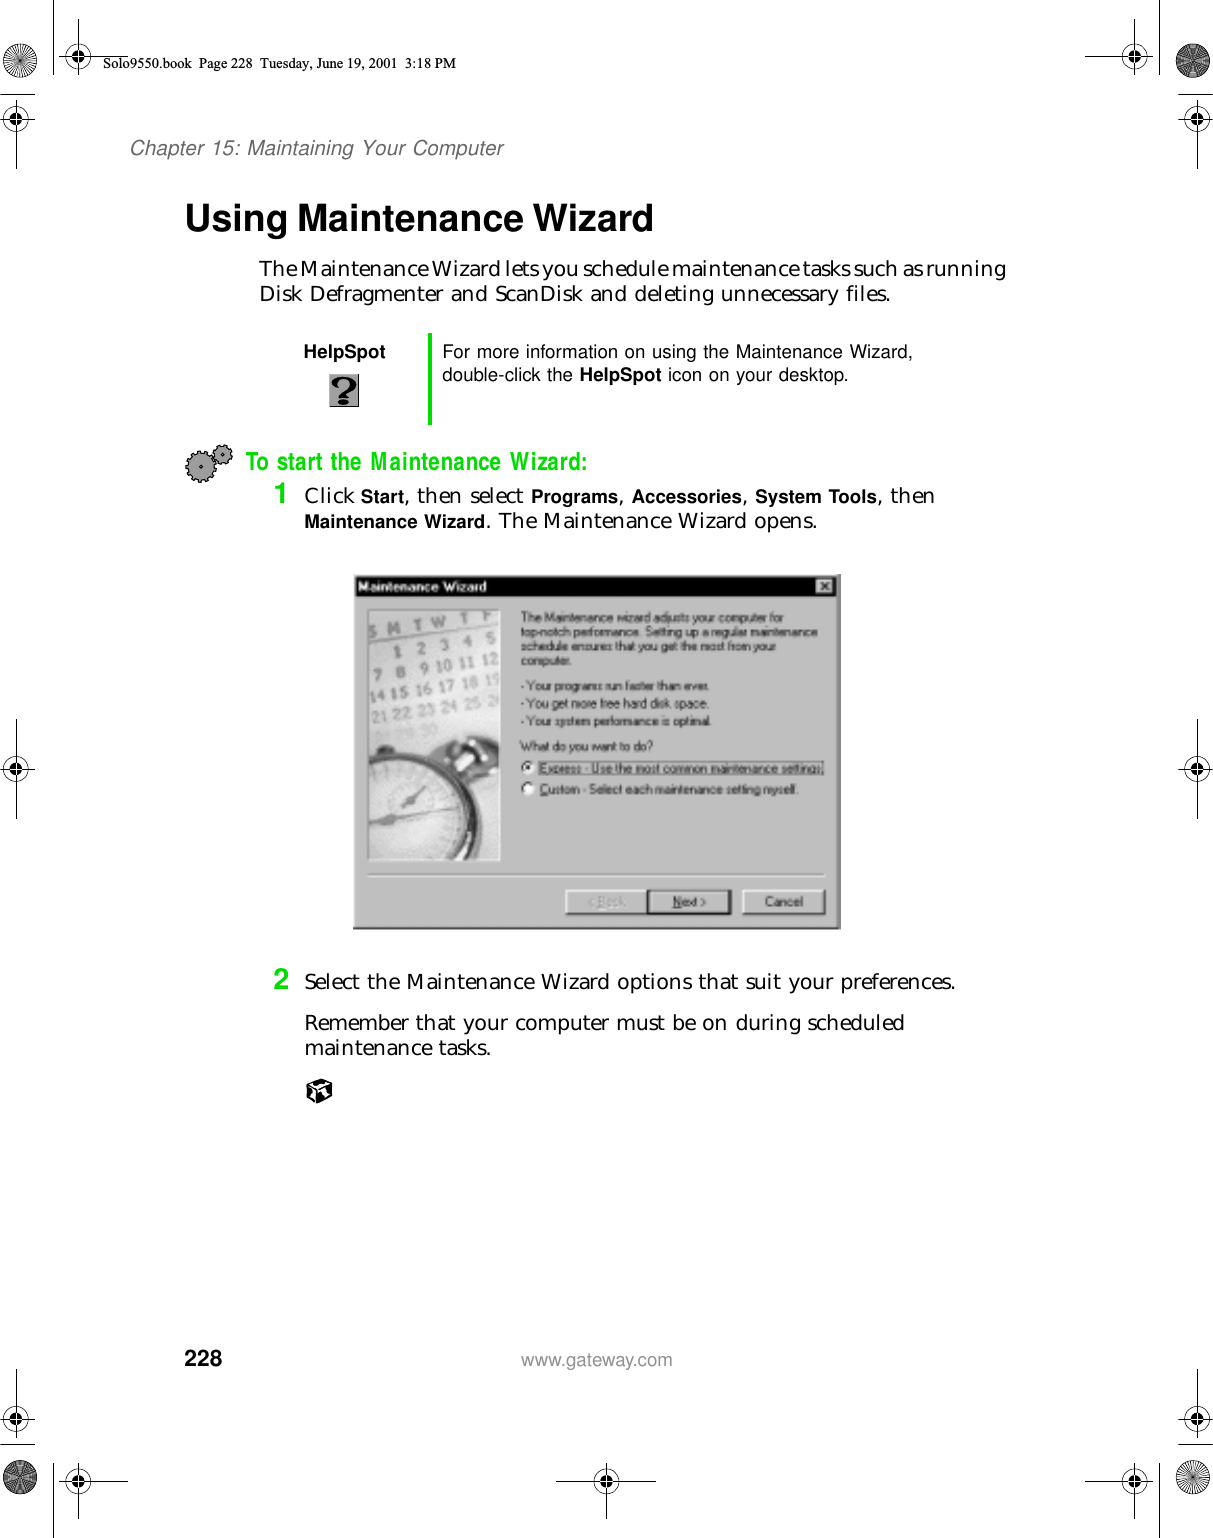 228Chapter 15: Maintaining Your Computerwww.gateway.comUsing Maintenance WizardThe Maintenance Wizard lets you schedule maintenance tasks such as running Disk Defragmenter and ScanDisk and deleting unnecessary files.To start the Maintenance Wizard:1Click Start, then select Programs, Accessories, System Tools, then Maintenance Wizard. The Maintenance Wizard opens.2Select the Maintenance Wizard options that suit your preferences.Remember that your computer must be on during scheduled maintenance tasks.HelpSpot For more information on using the Maintenance Wizard, double-click the HelpSpot icon on your desktop.Solo9550.book Page 228 Tuesday, June 19, 2001 3:18 PM